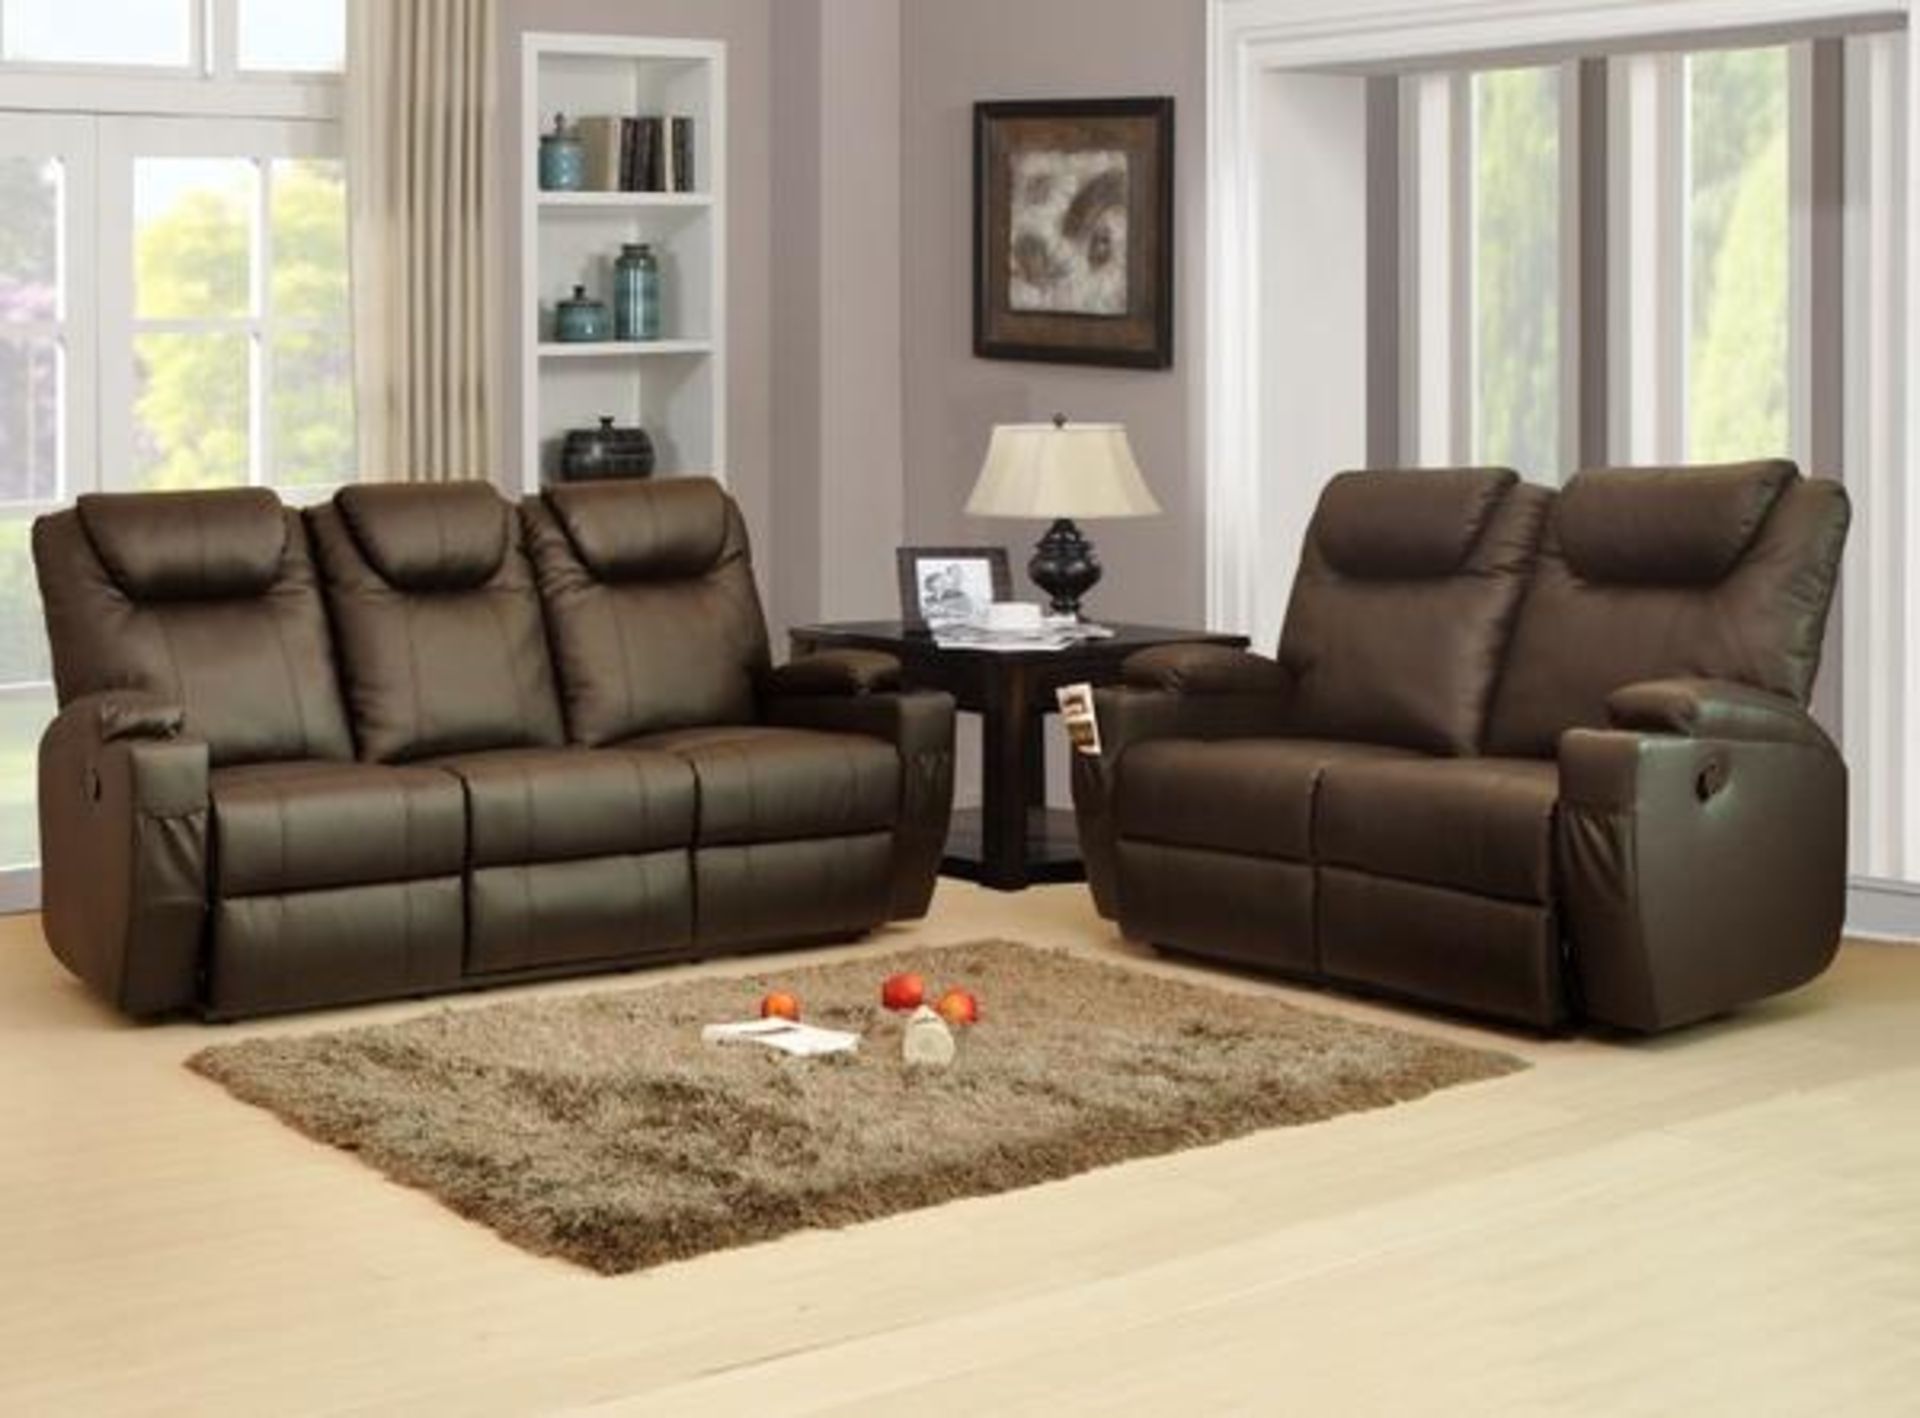 Brand New Boxed 3 Seater Plus 2 Seater Lazyboy Brown Leather Manual Reclining Sofas